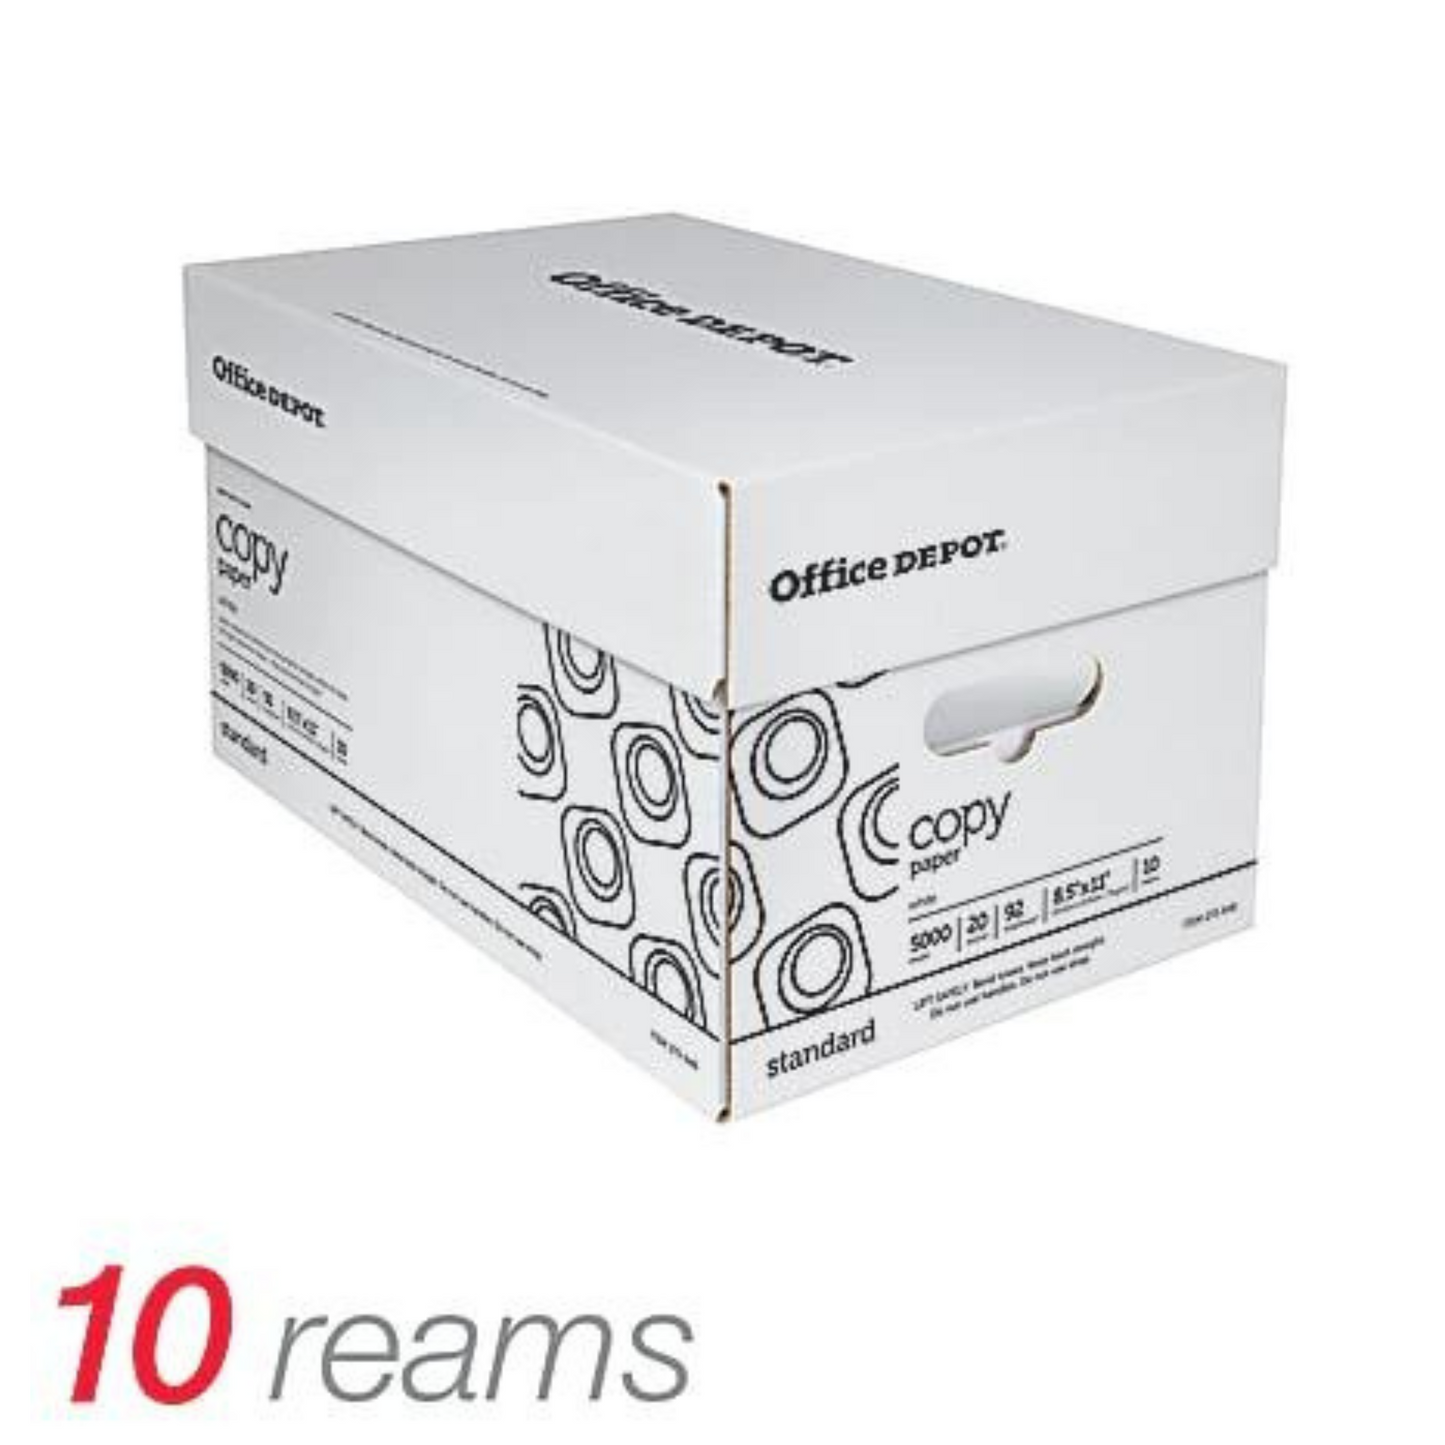 Office Depot Brand Copy Paper, Letter Size 8 1/2" x 11", 92 Brightness, 20 Lb, White, 500 Sheets Per Ream, Case Of 10 Reams